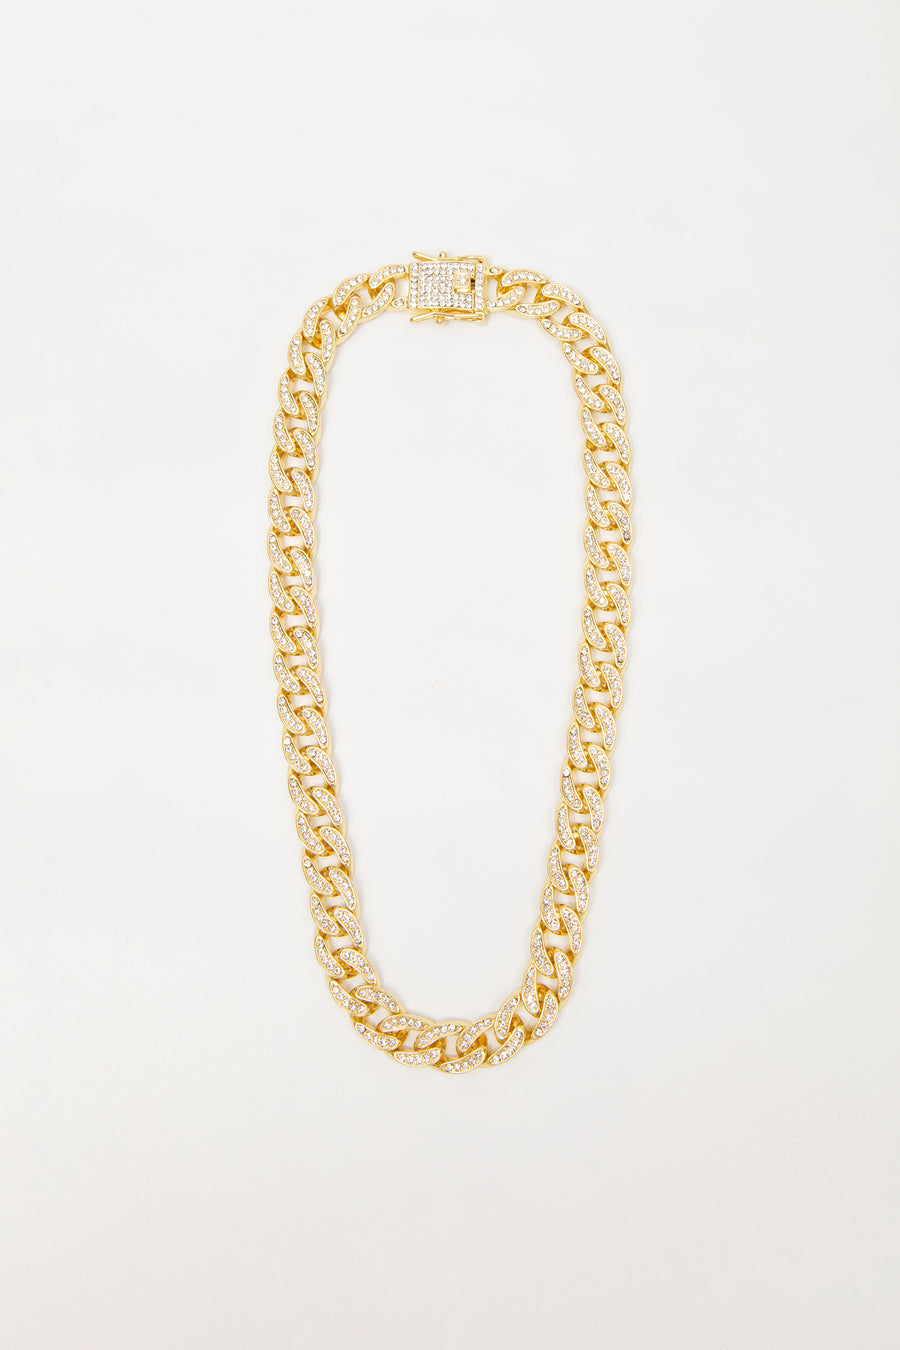 13MM 14K White Stones Chain with Lock, 16” 18” 20” 22” 24” 26”